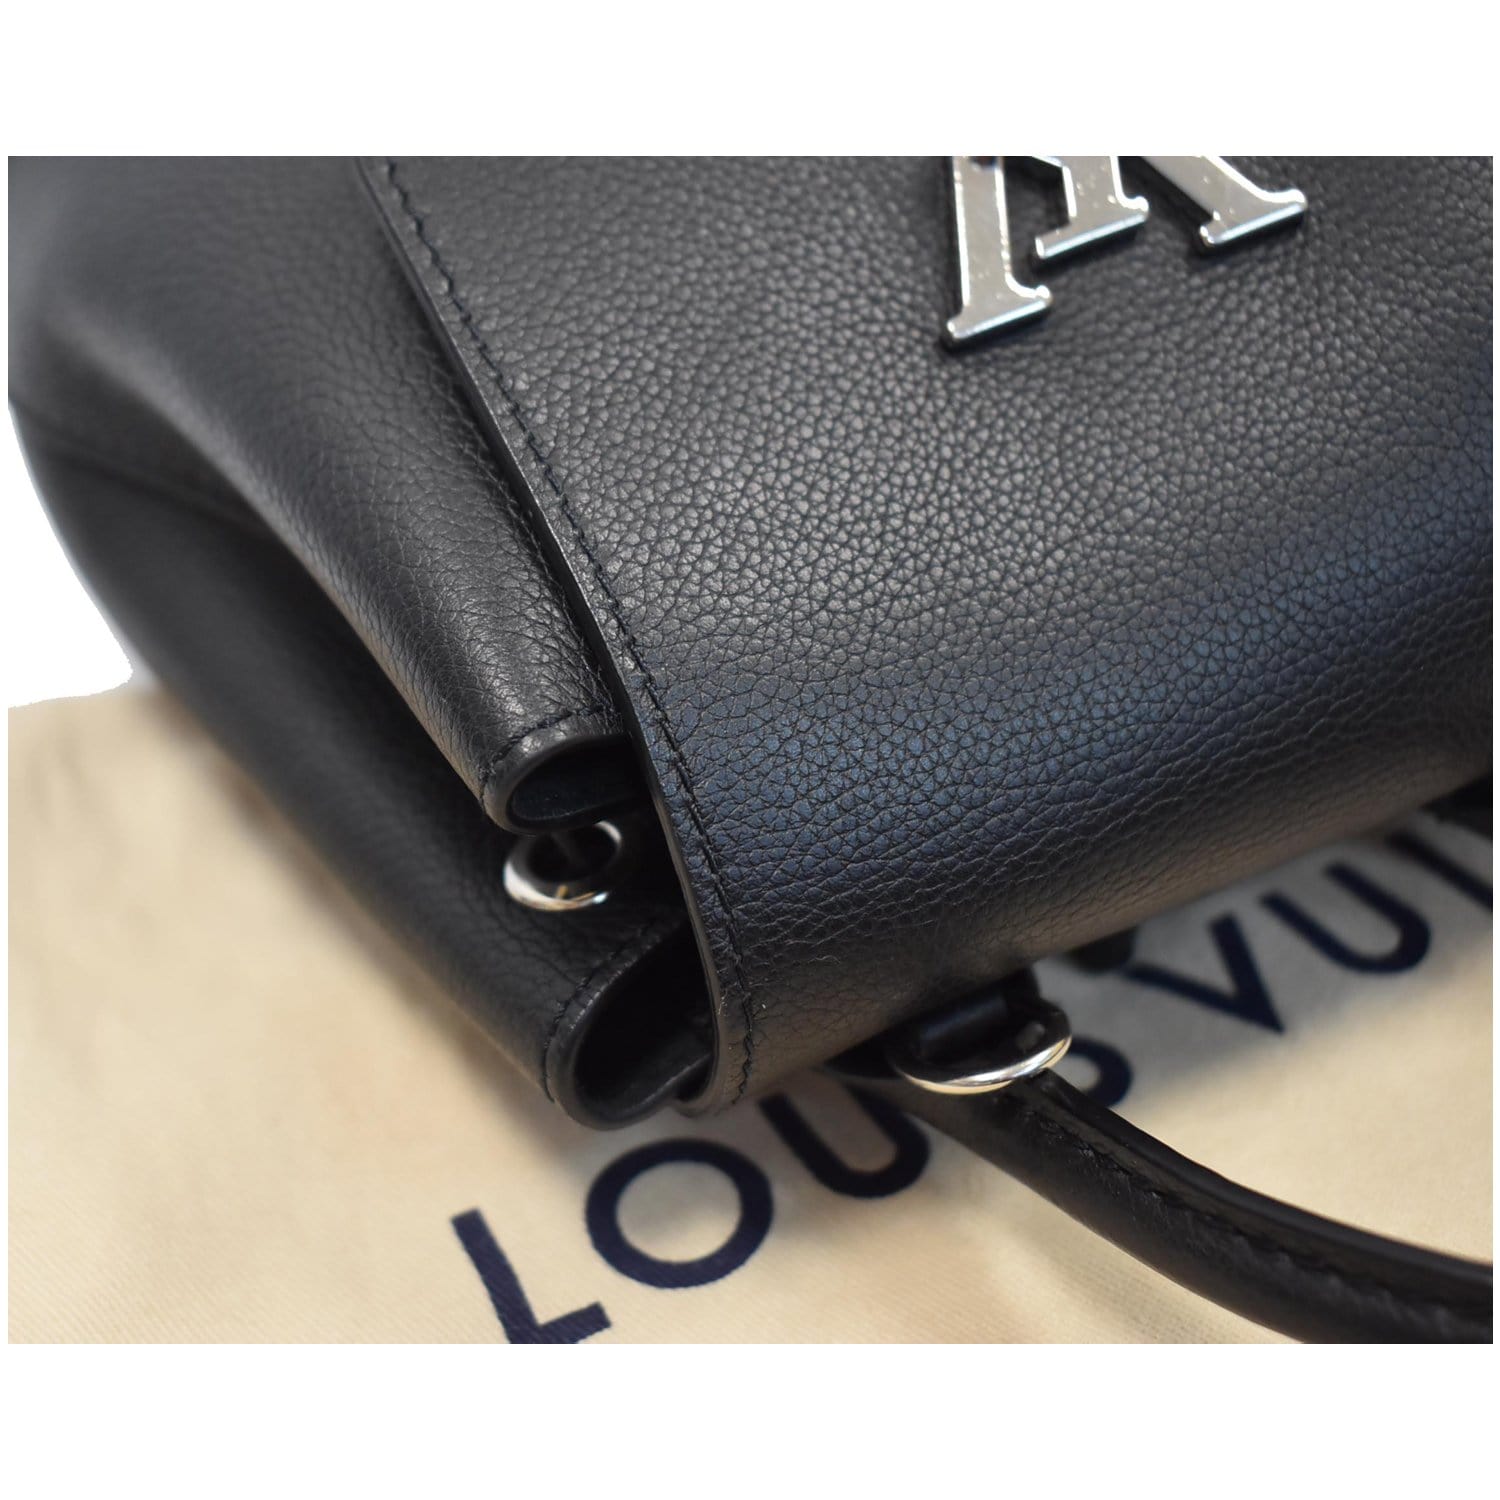 Lockme leather backpack Louis Vuitton Black in Leather - 26519796